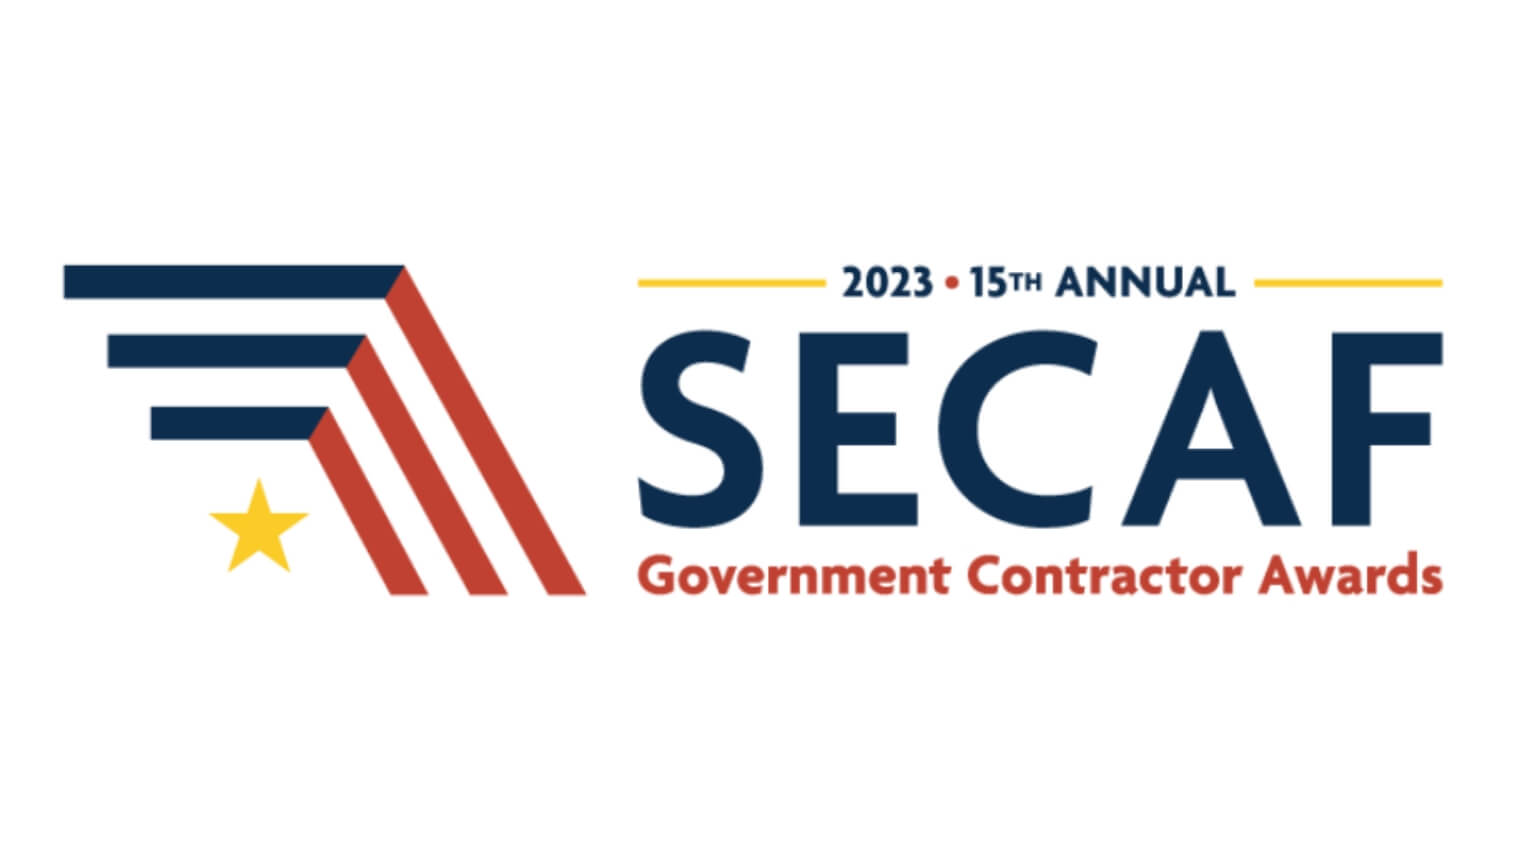 SECAF Government Contractor Award